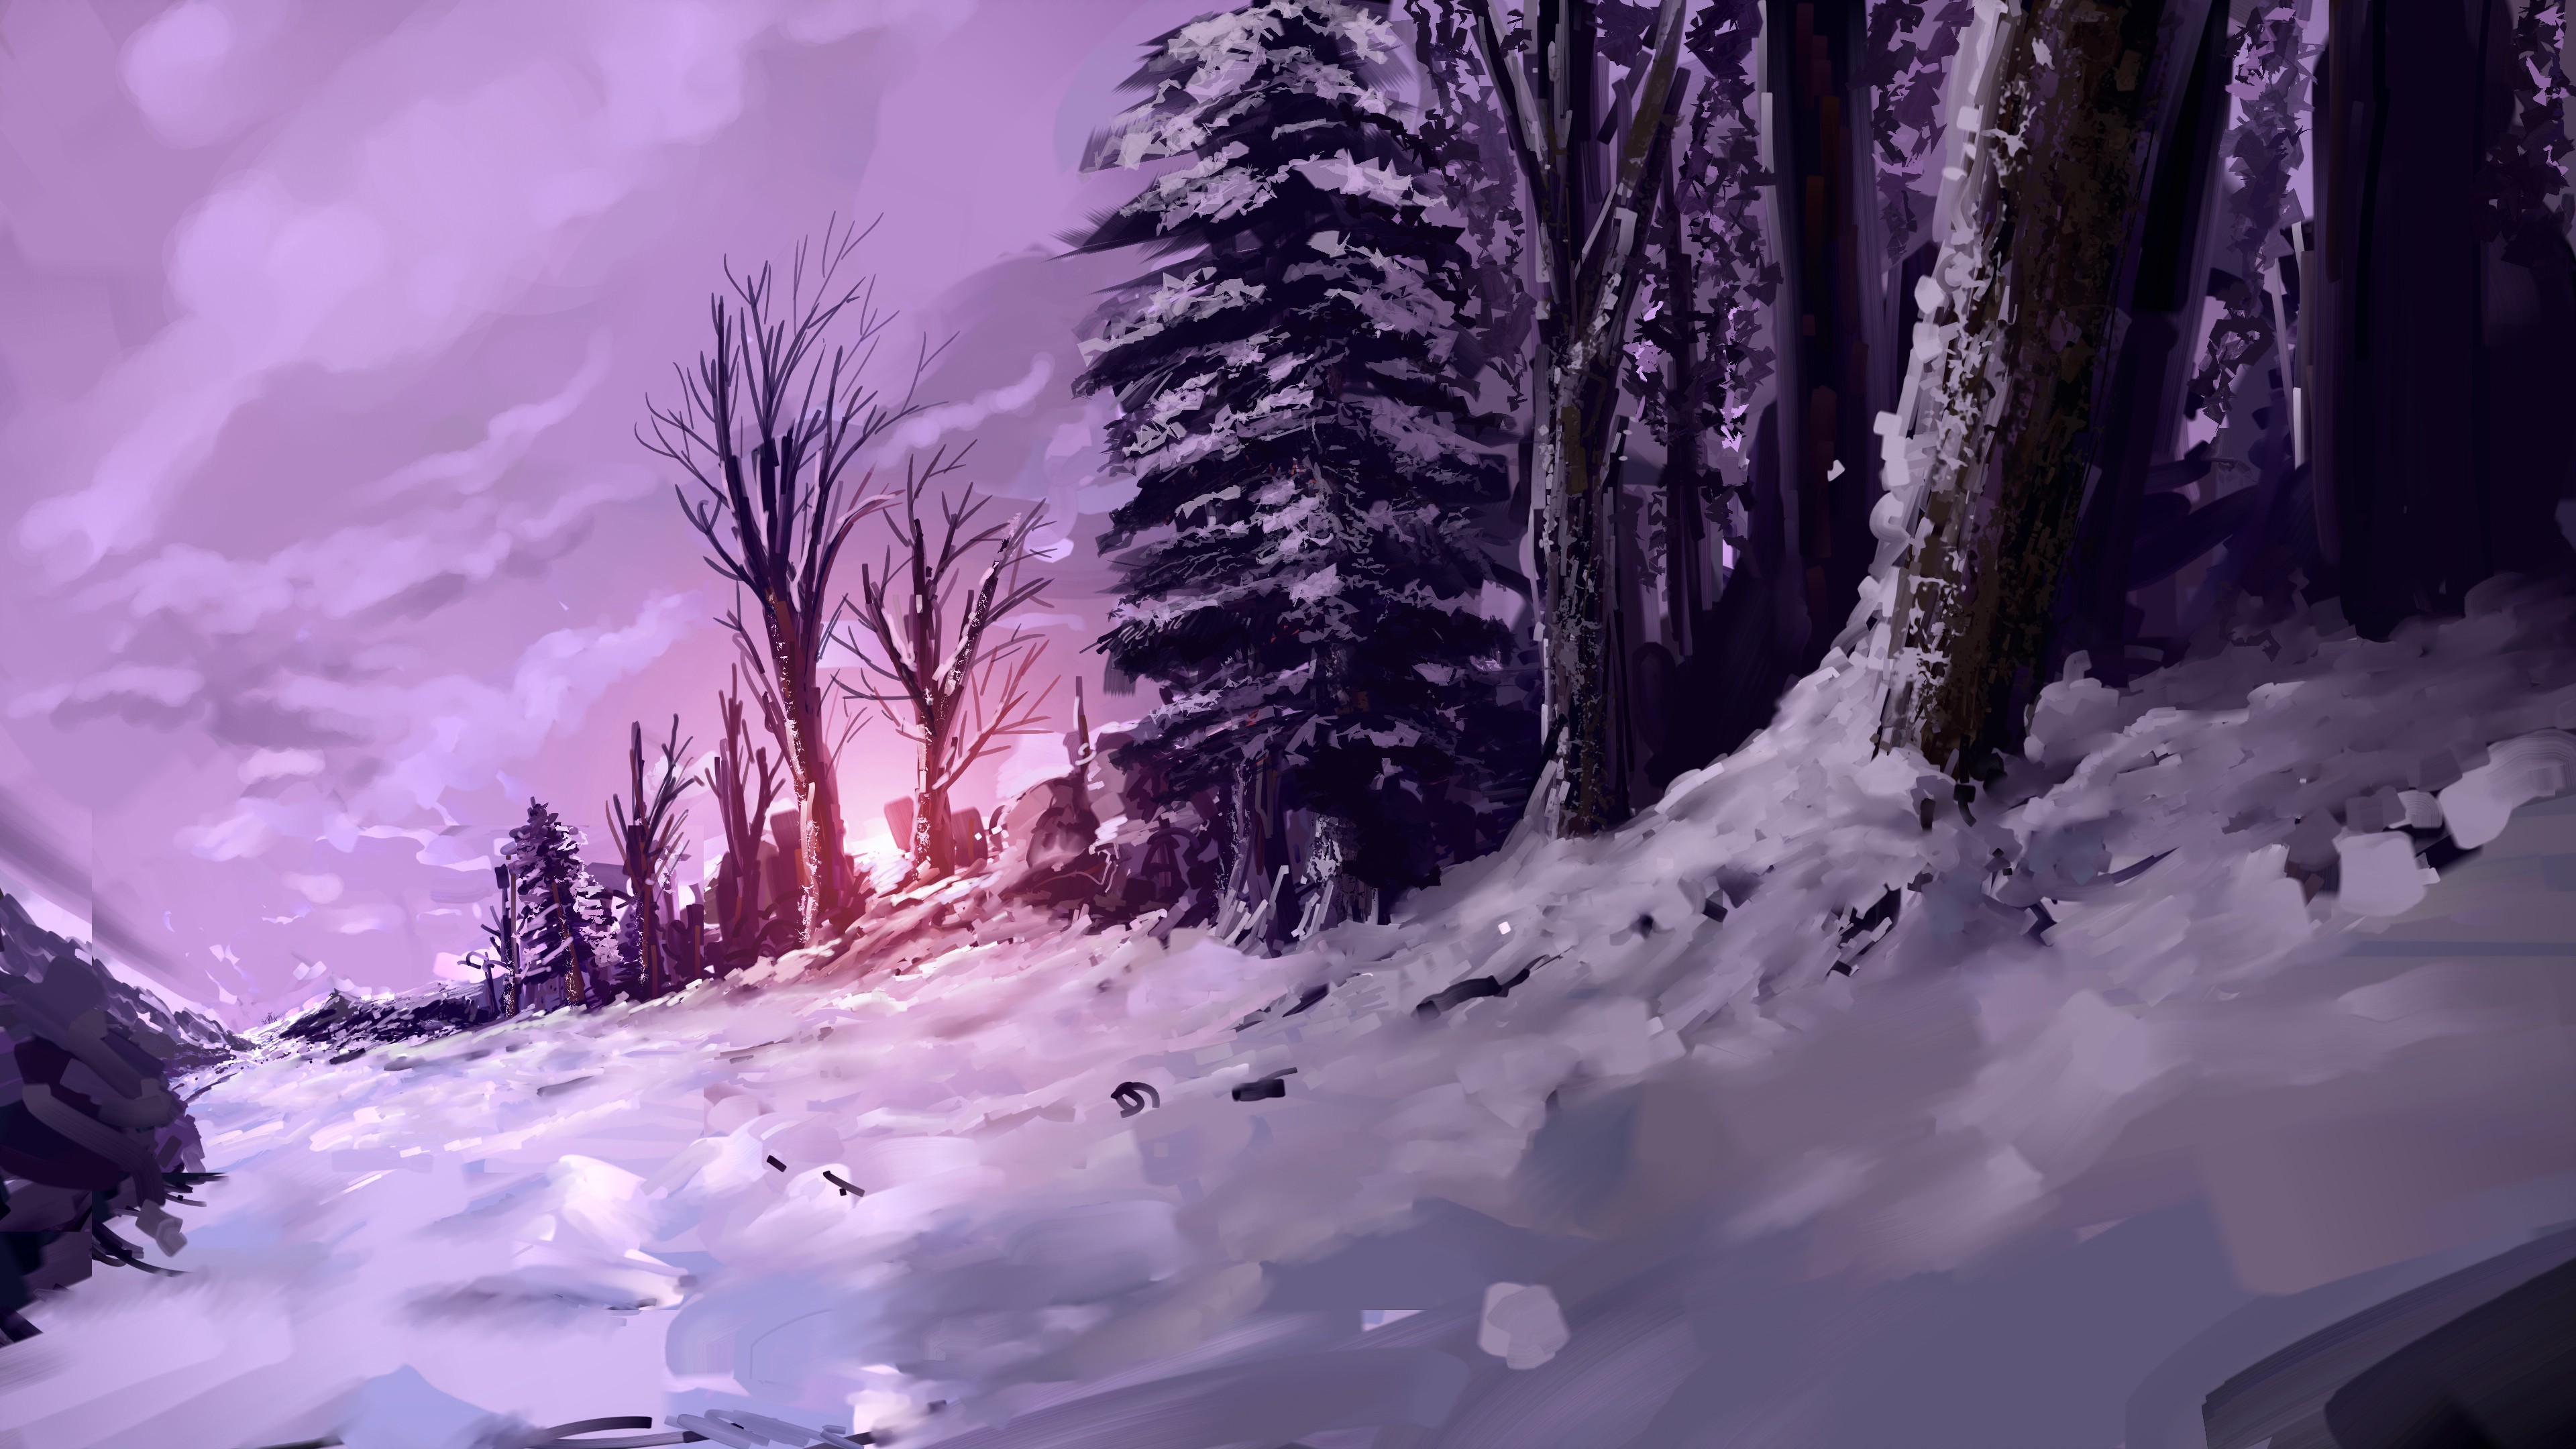 General 3840x2160 fantasy art snow forest trees artwork cold winter ice outdoors nature digital art